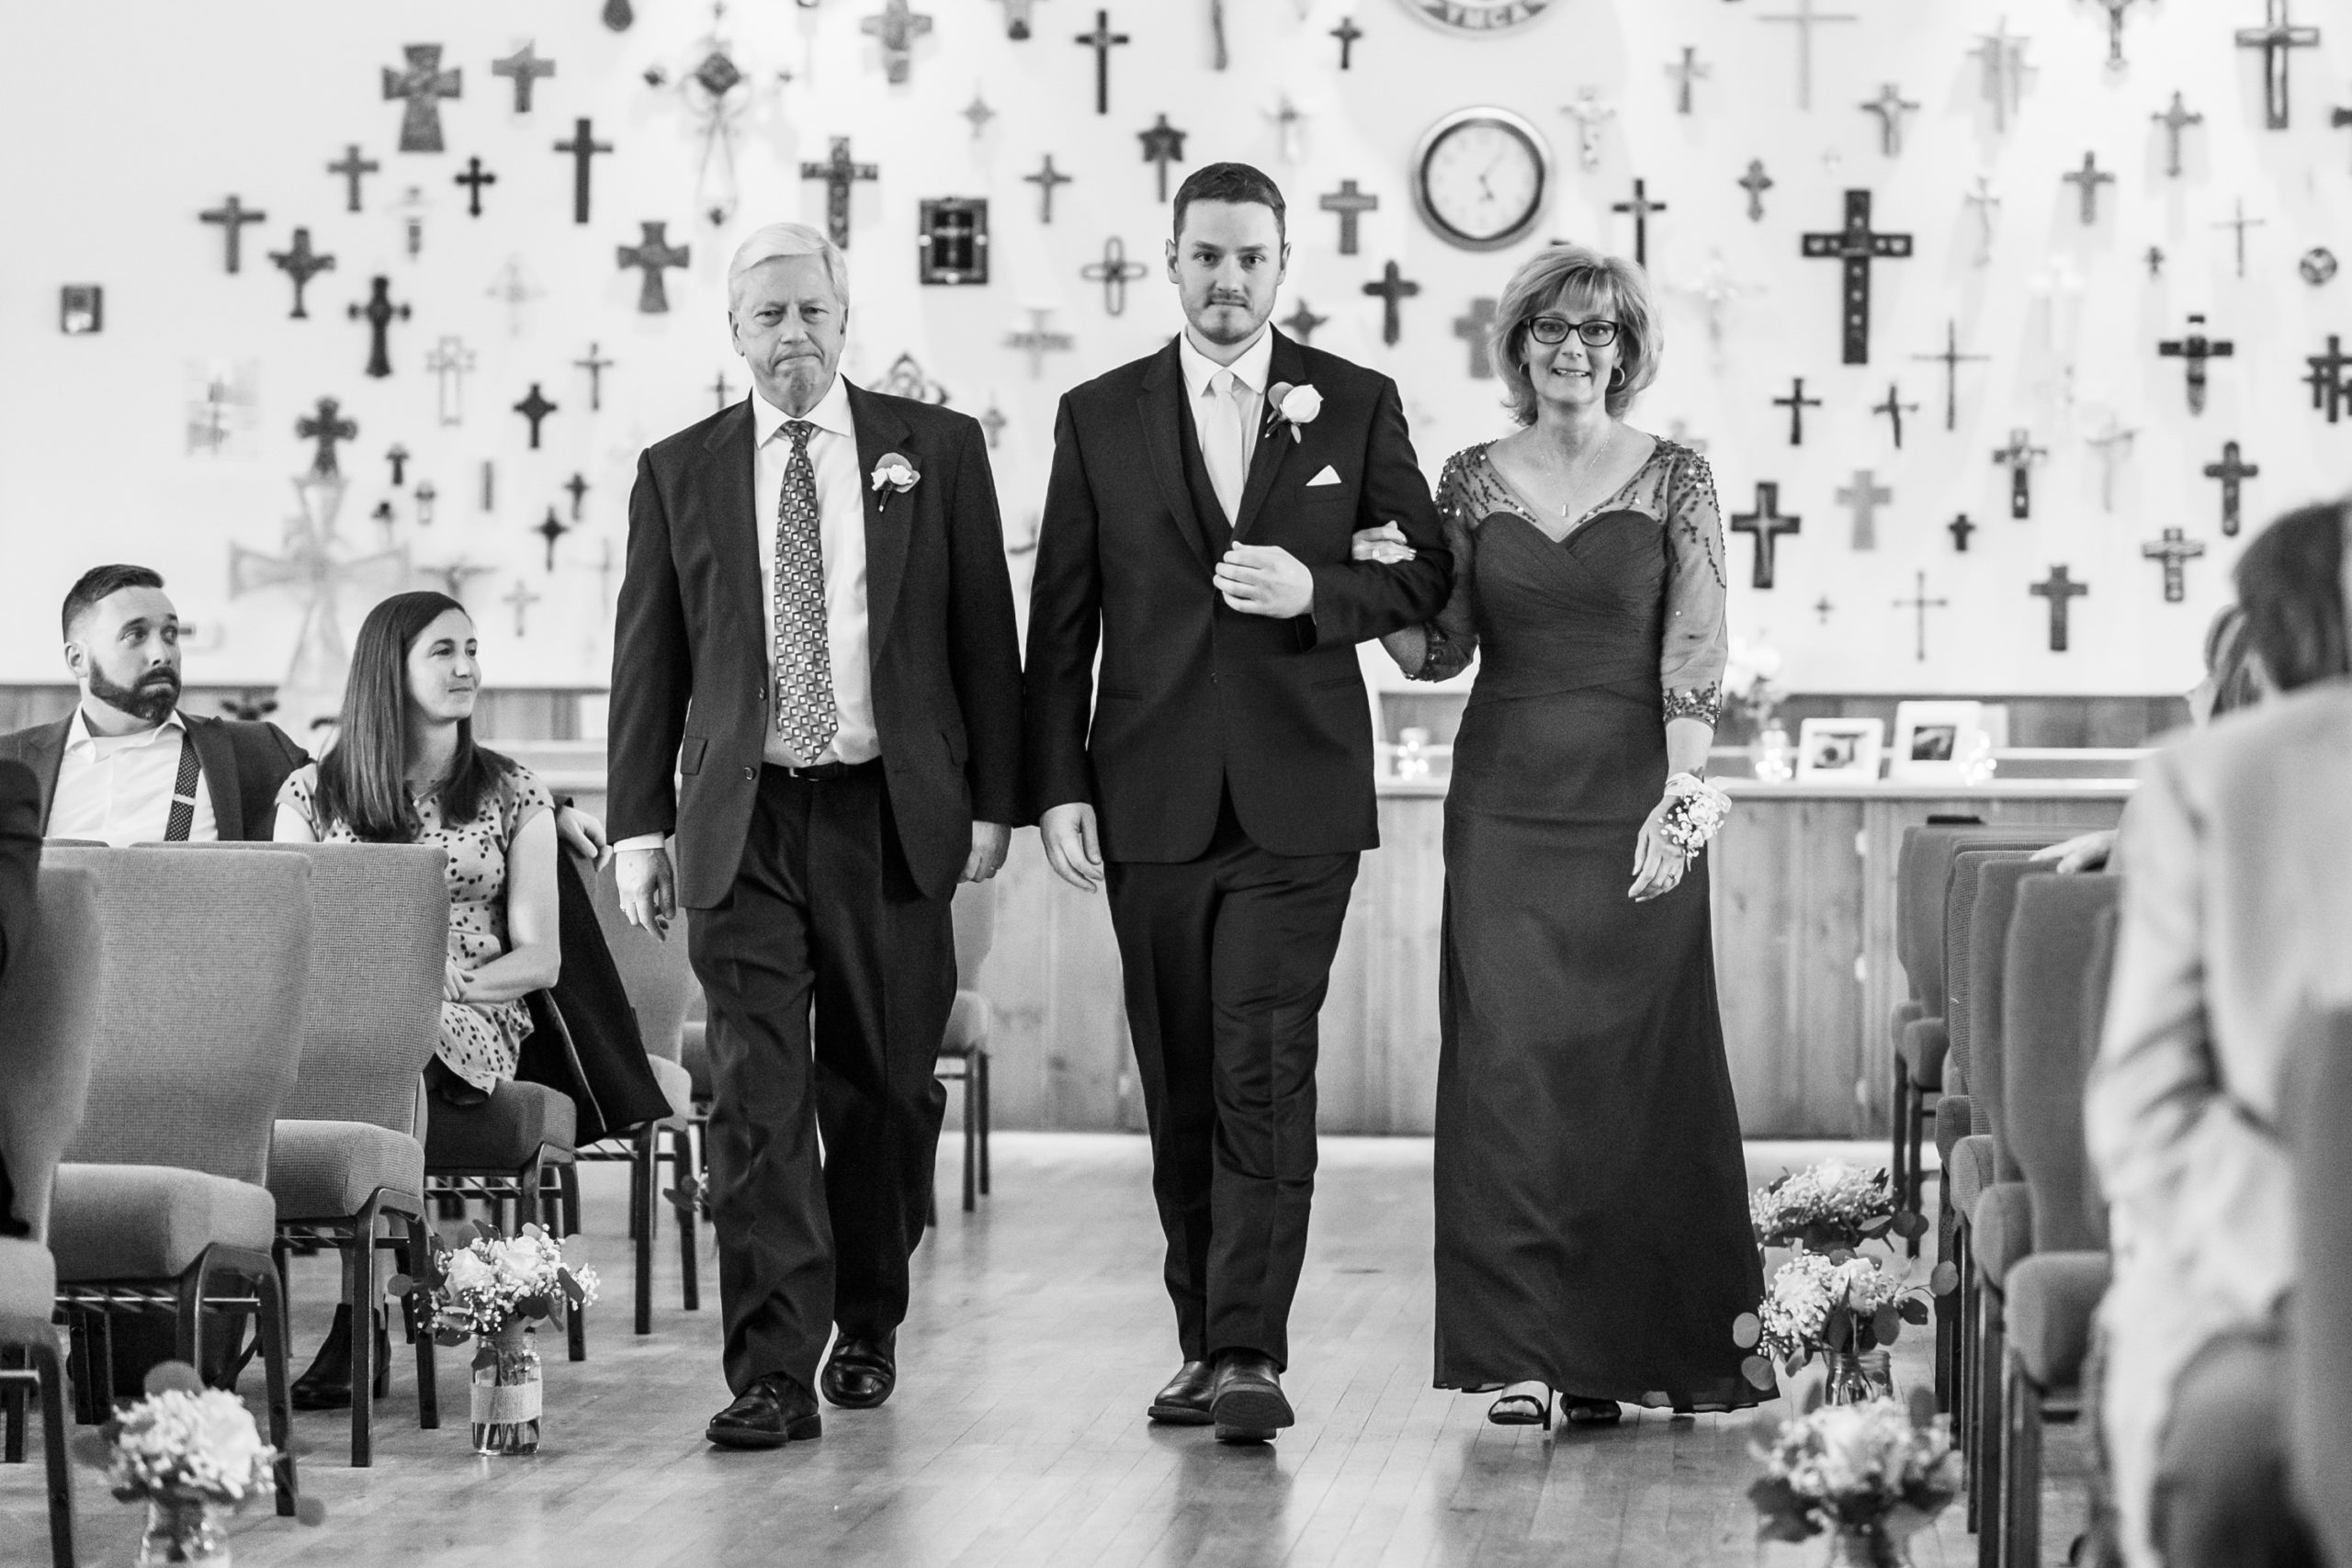 The groom and his parents process in during the YMCA of the Rockies wedding in Estes Park, Colorado.